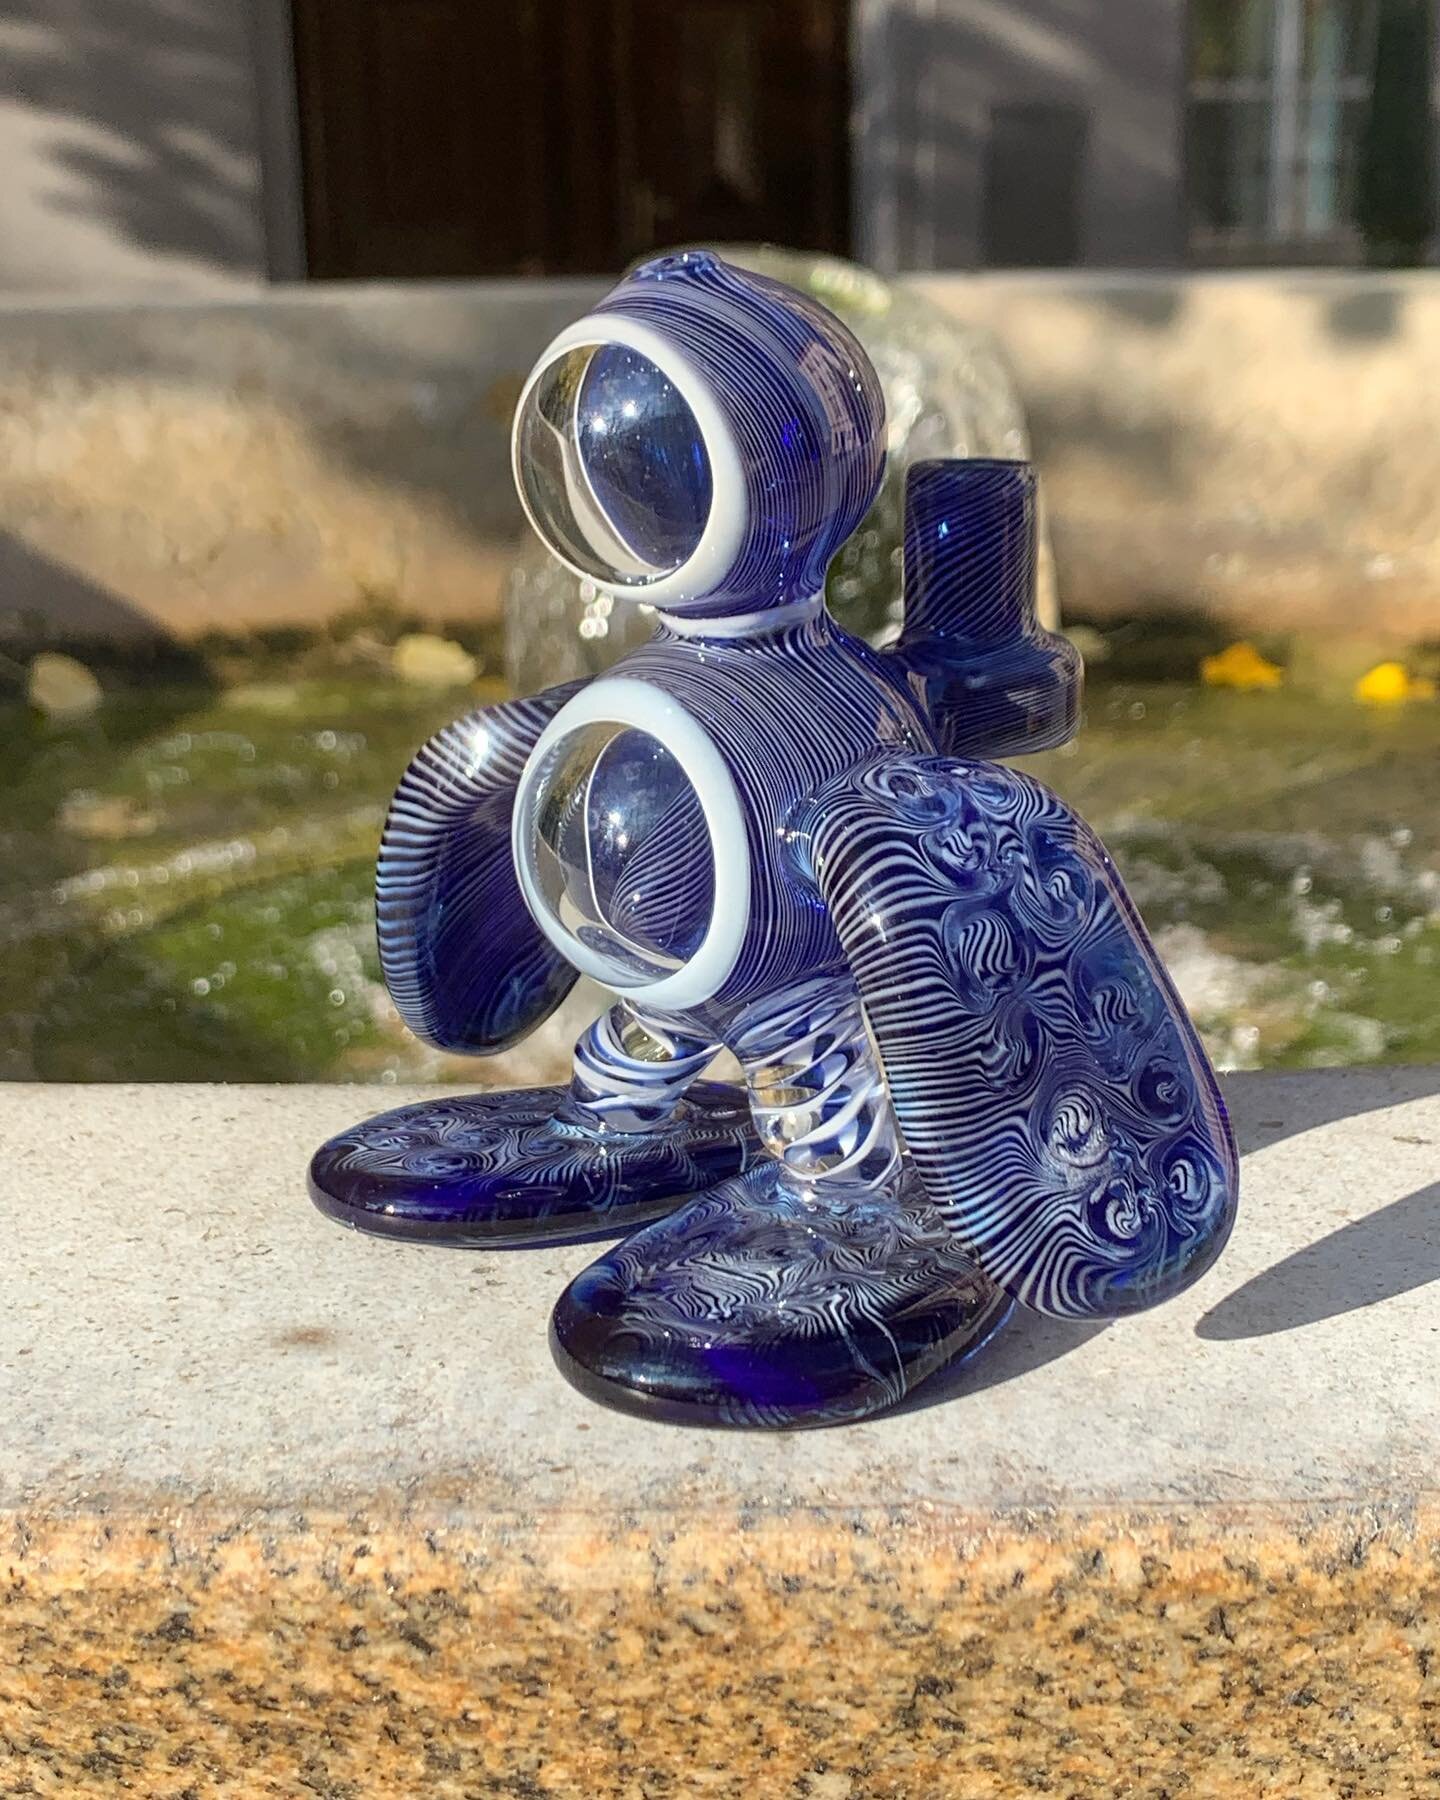 Cosmonaut serie

Open belly, studying more ideas for the next pieces and you guys are sending  me some cool ones to upgrade this serie. Thanks a lot for sharing your suggestions 💚🙏

High 16 cm
10 mm joint
2 holes percolator

#&rsquo;22/34

________